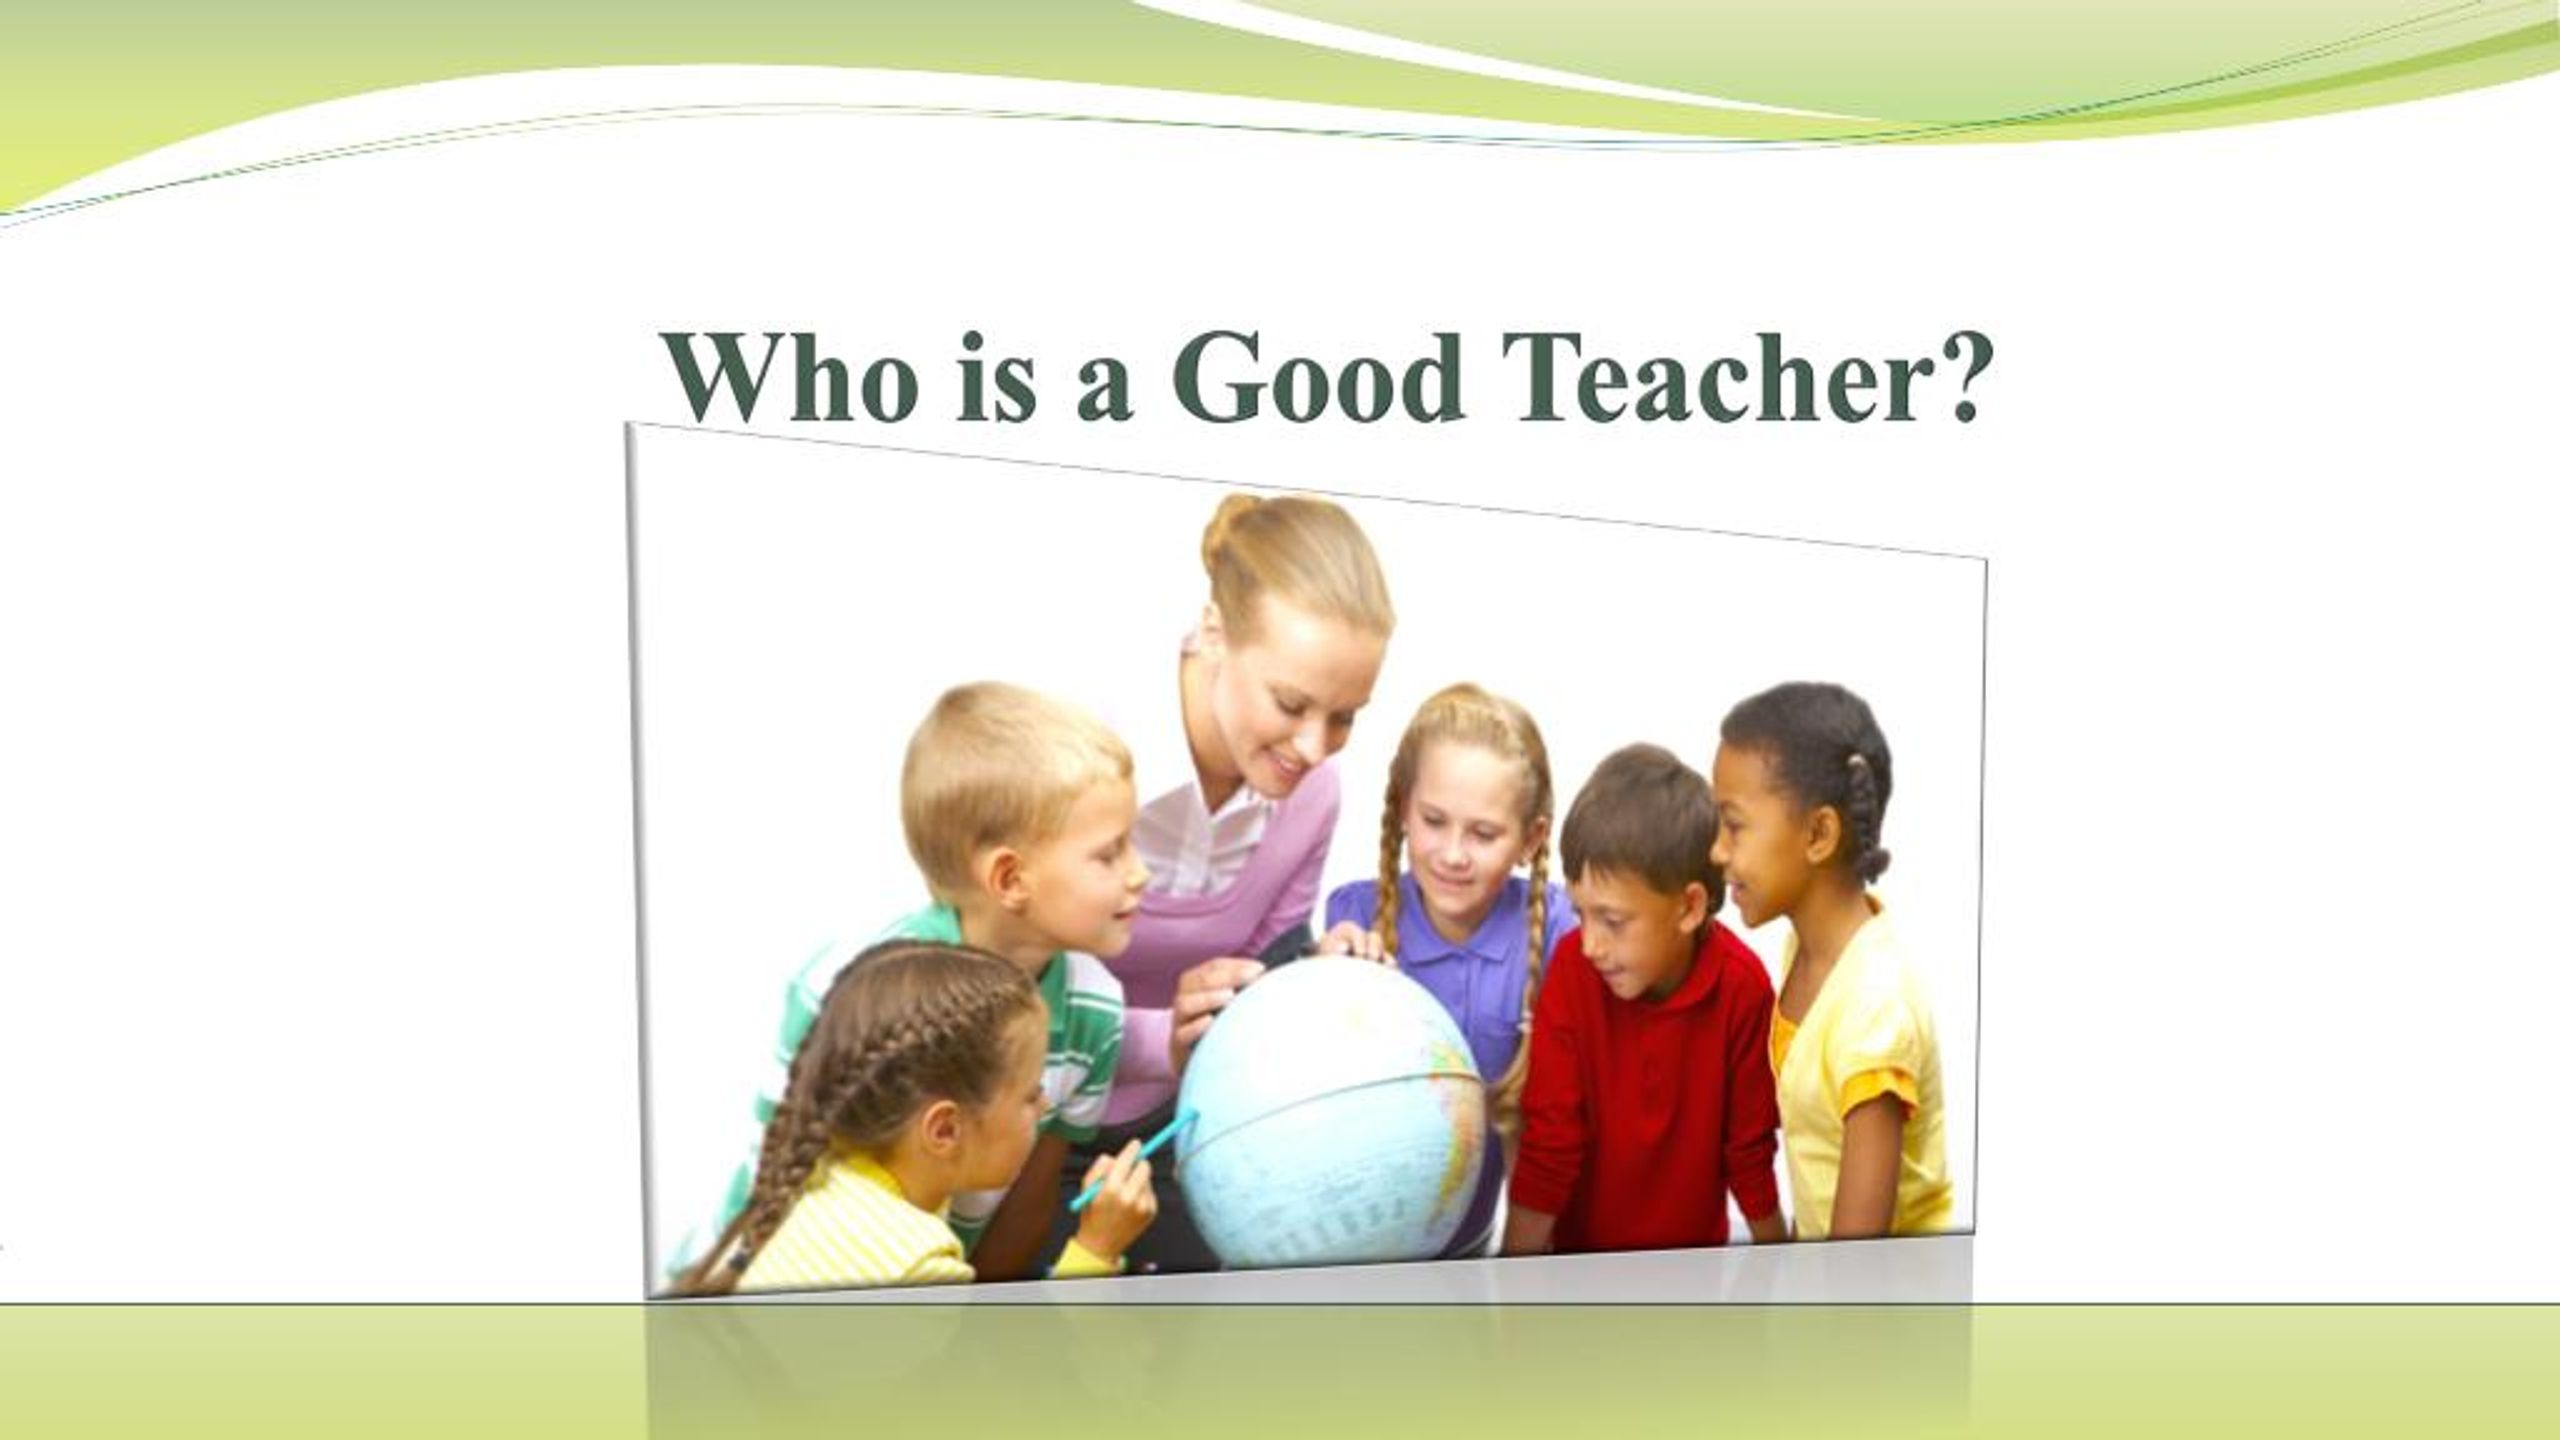 English who. Who is the teacher. Who is the best teacher. Написать по английски who is good teacher.